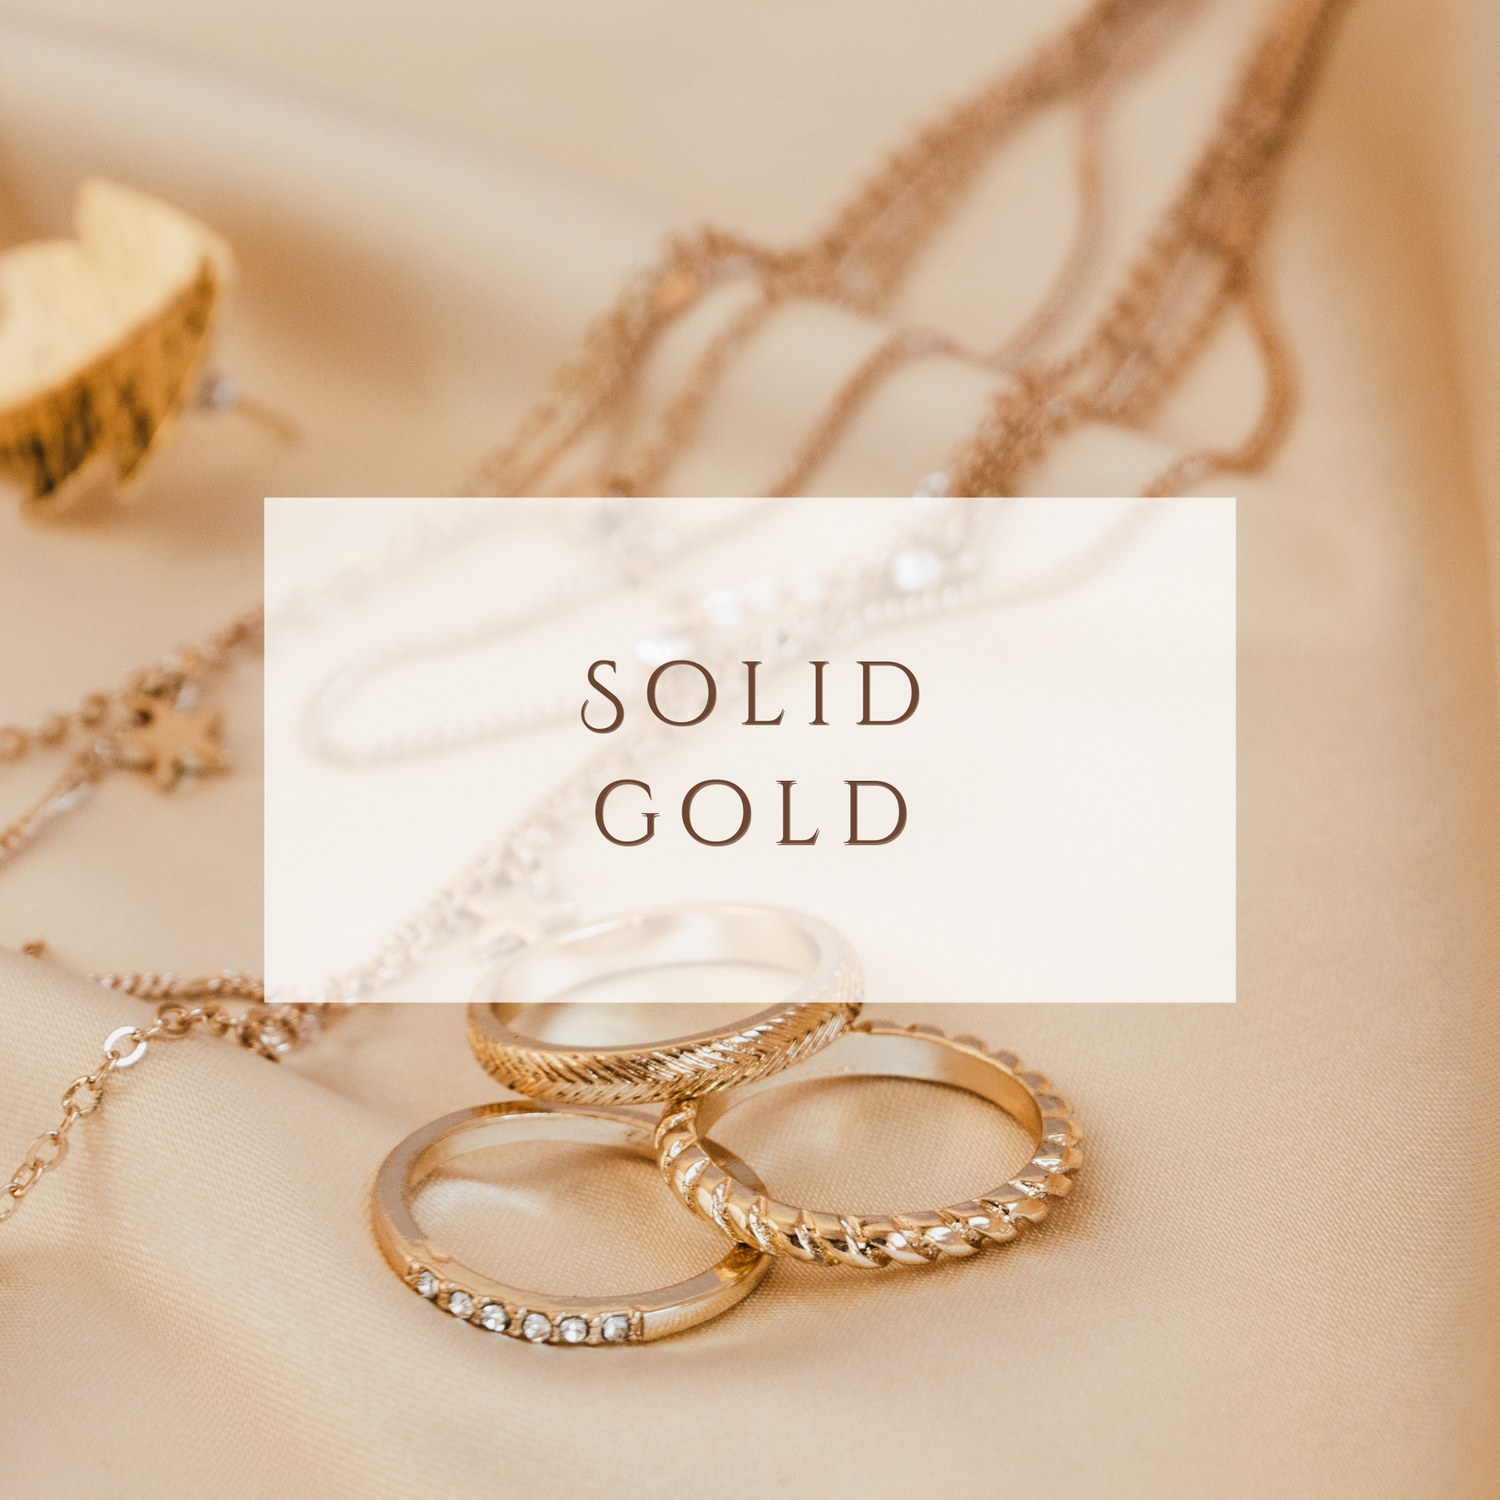 solid gold jewelry